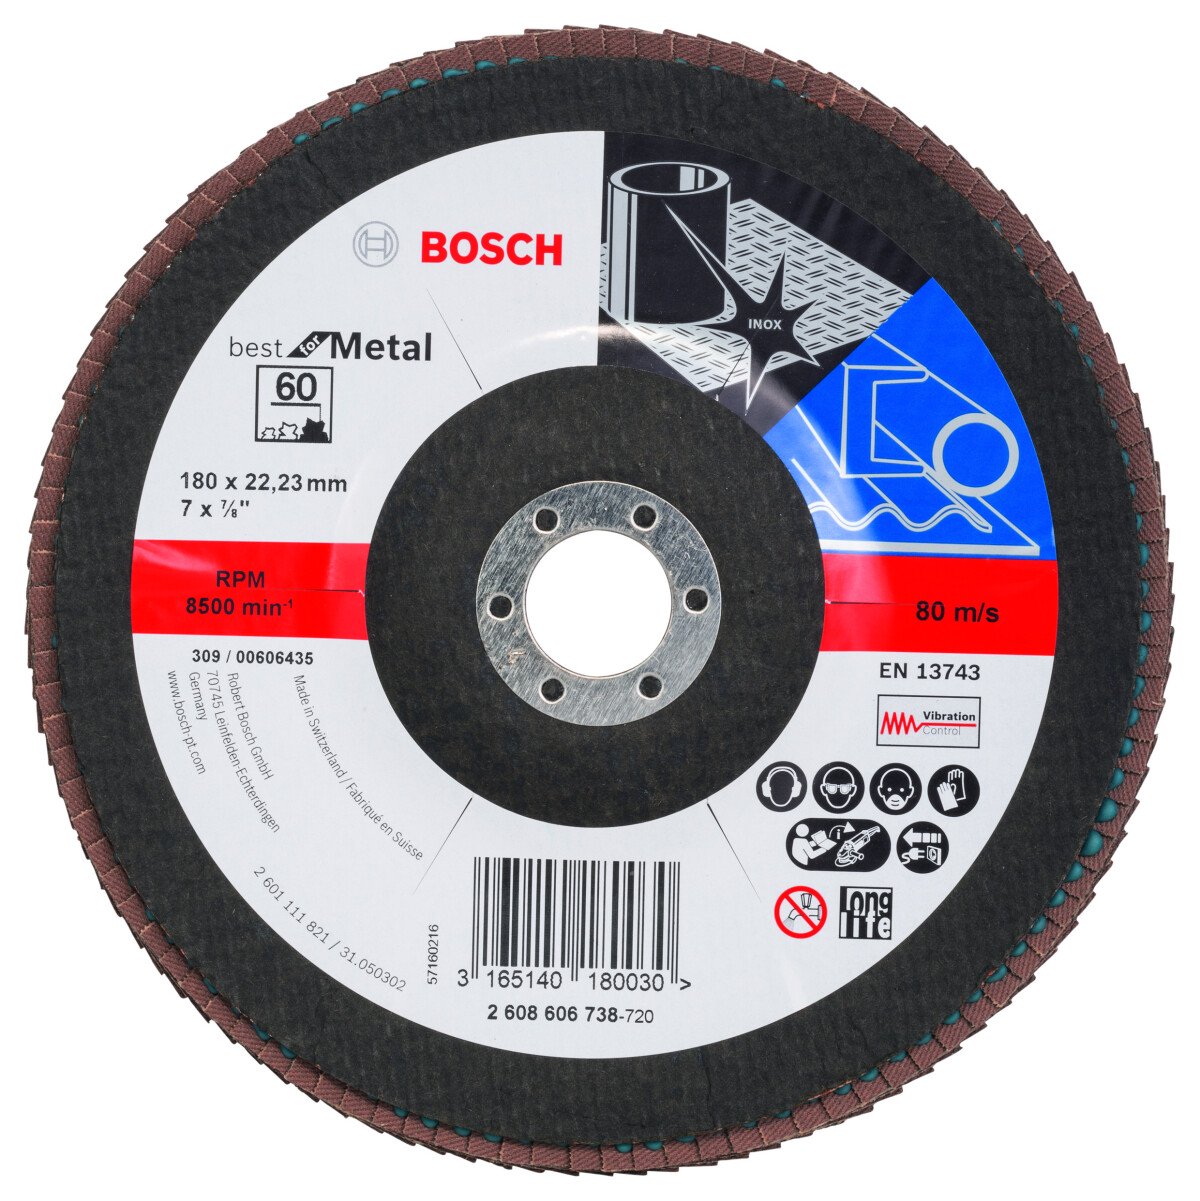 Bosch 2608606738 Flap Sanding discs for Angle Grinders . 180x22 G60